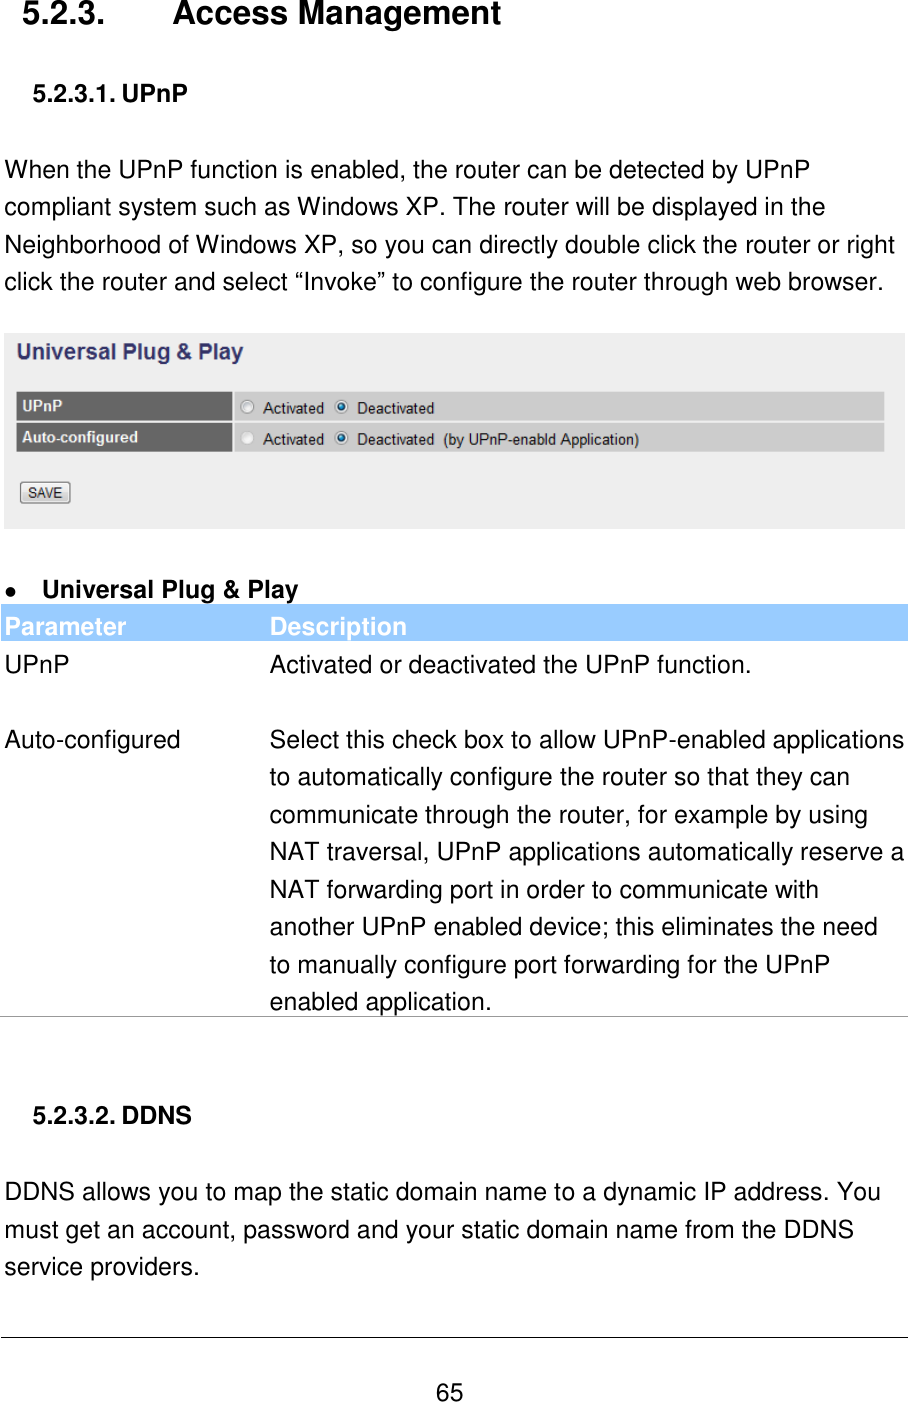   65 5.2.3.  Access Management  5.2.3.1. UPnP  When the UPnP function is enabled, the router can be detected by UPnP compliant system such as Windows XP. The router will be displayed in the Neighborhood of Windows XP, so you can directly double click the router or right click the router and select “Invoke” to configure the router through web browser.     Universal Plug &amp; Play Parameter Description UPnP Activated or deactivated the UPnP function.    Auto-configured Select this check box to allow UPnP-enabled applications to automatically configure the router so that they can communicate through the router, for example by using NAT traversal, UPnP applications automatically reserve a NAT forwarding port in order to communicate with another UPnP enabled device; this eliminates the need to manually configure port forwarding for the UPnP enabled application.   5.2.3.2. DDNS  DDNS allows you to map the static domain name to a dynamic IP address. You must get an account, password and your static domain name from the DDNS service providers.  